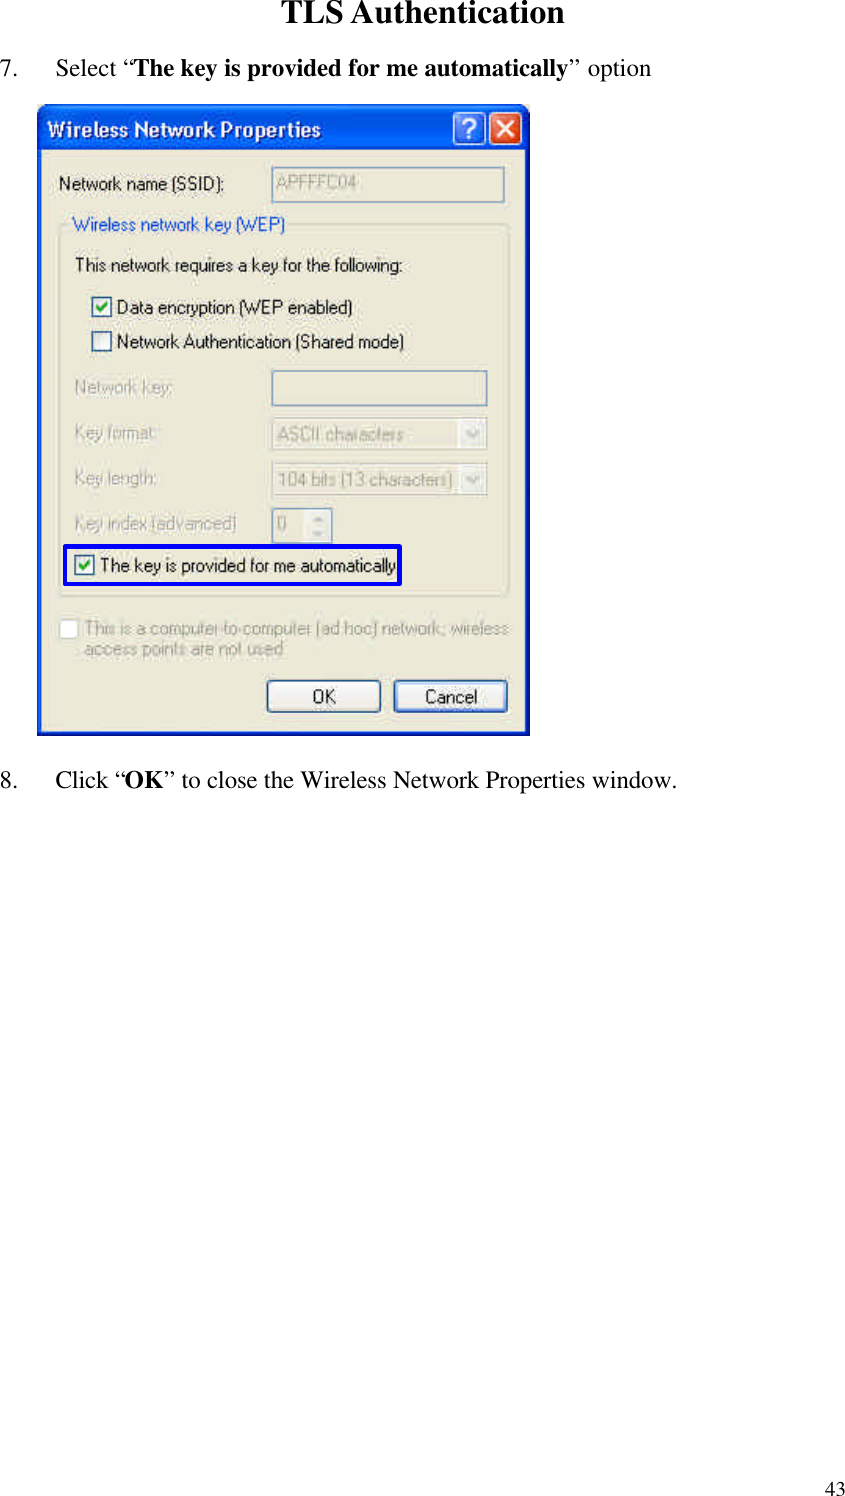  43TLS Authentication 7. Select “The key is provided for me automatically” option                   8. Click “OK” to close the Wireless Network Properties window.                 